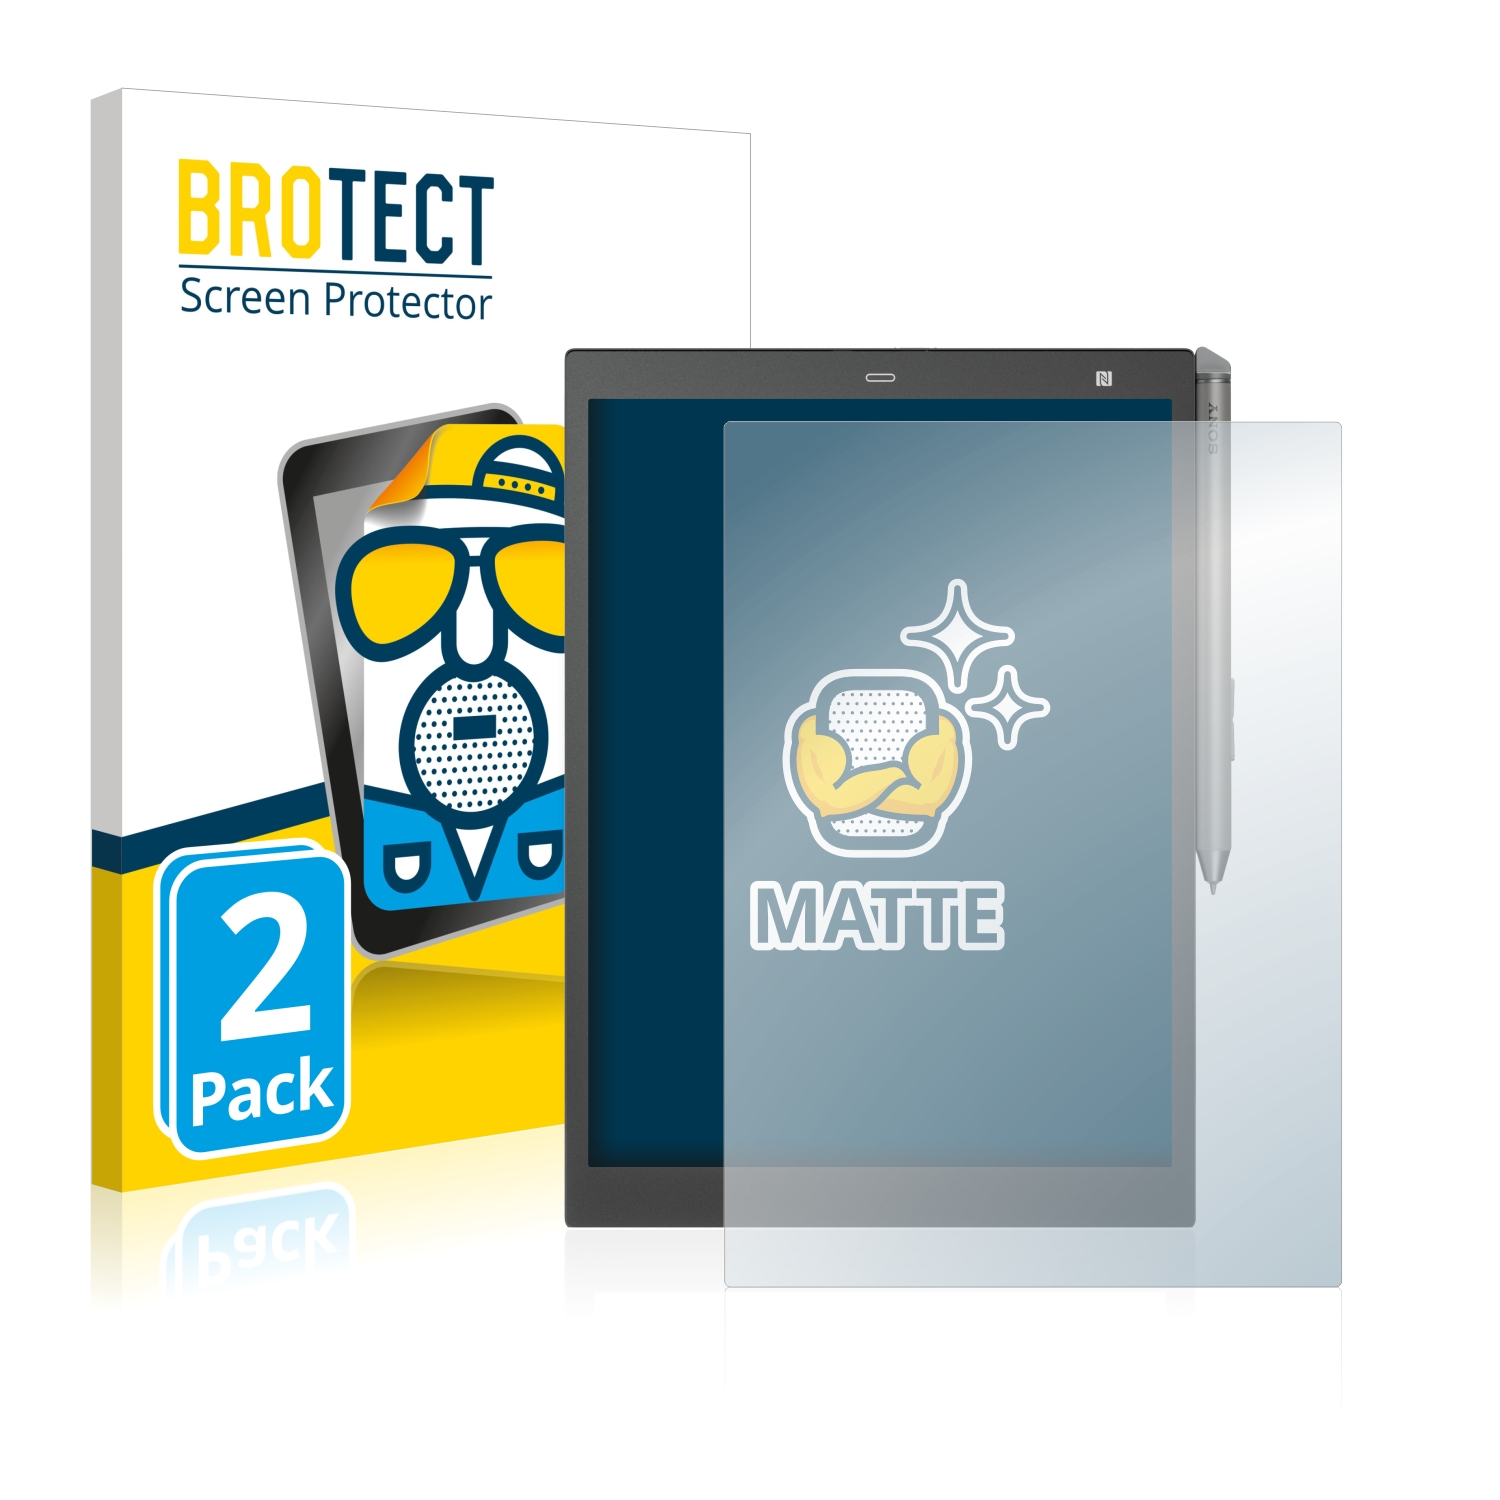 Matte Anti-Glare Matte Screen Protector for Sony DPT-RP1 BROTECT Anti-Scratch 